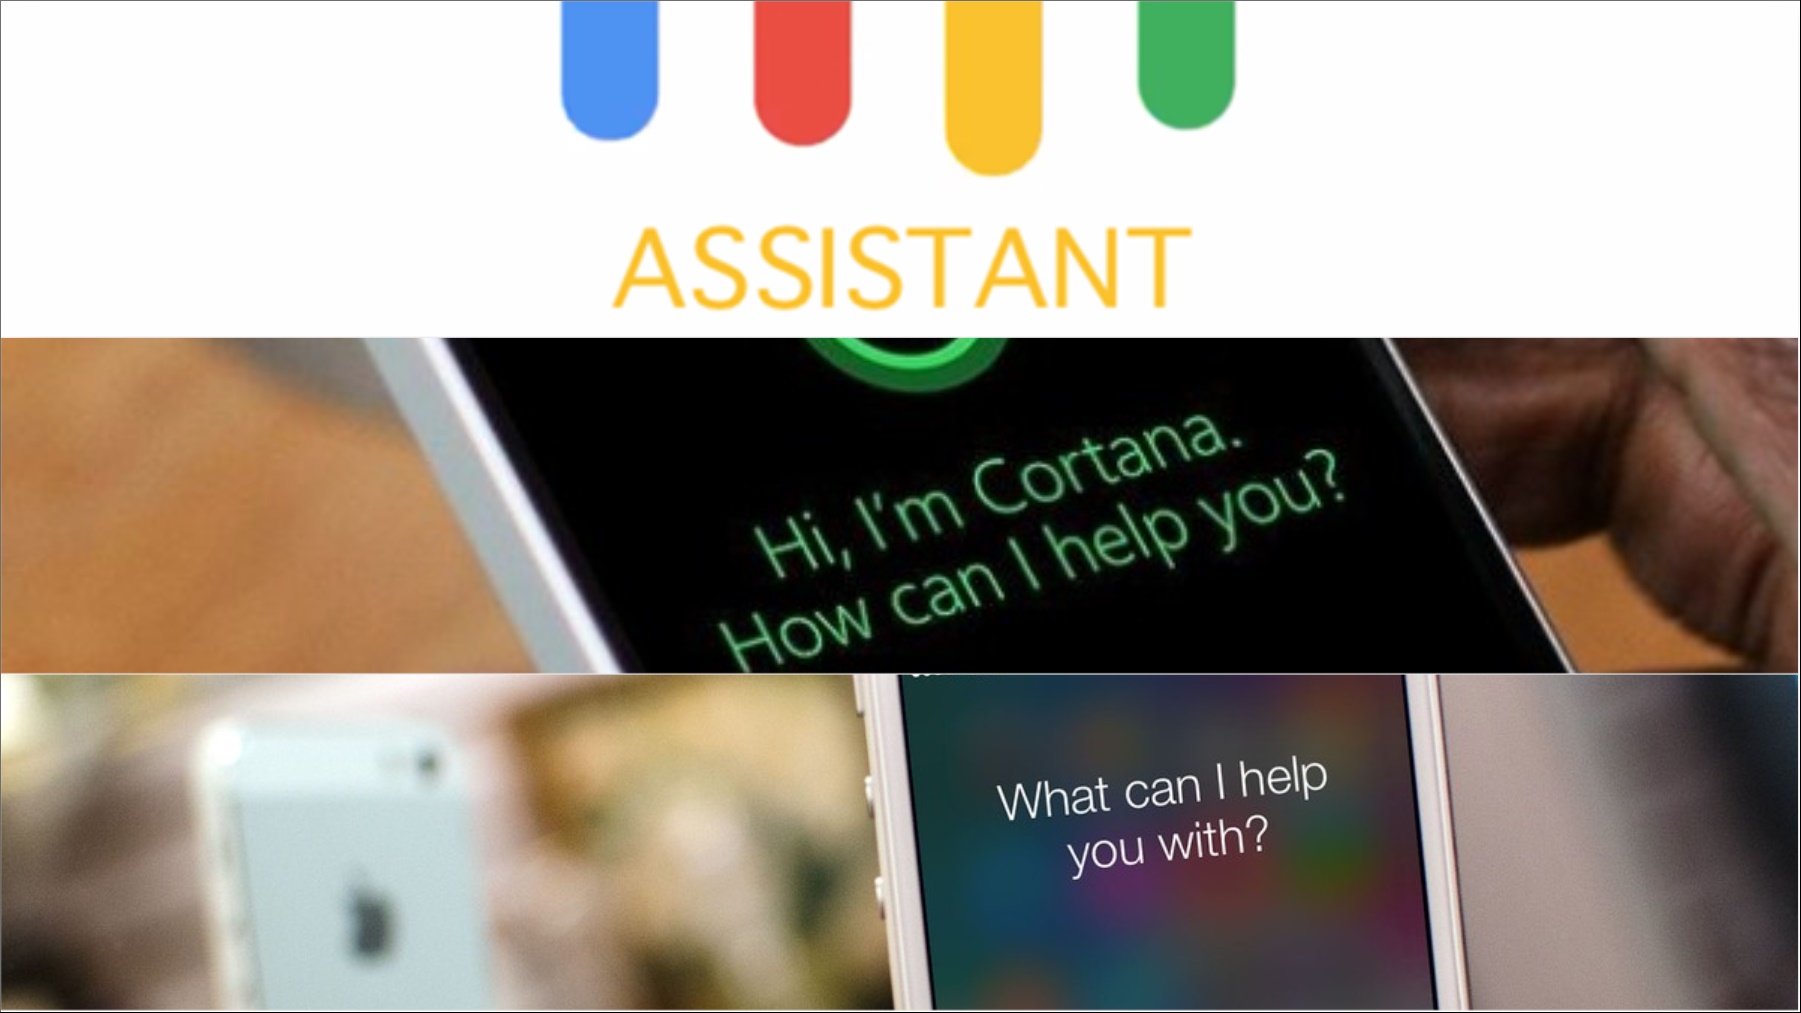  Google Assistant vs. Microsoft Cortana vs. Apple Siri? Which is the Best AI Based Personal/ Virtual Assistant?